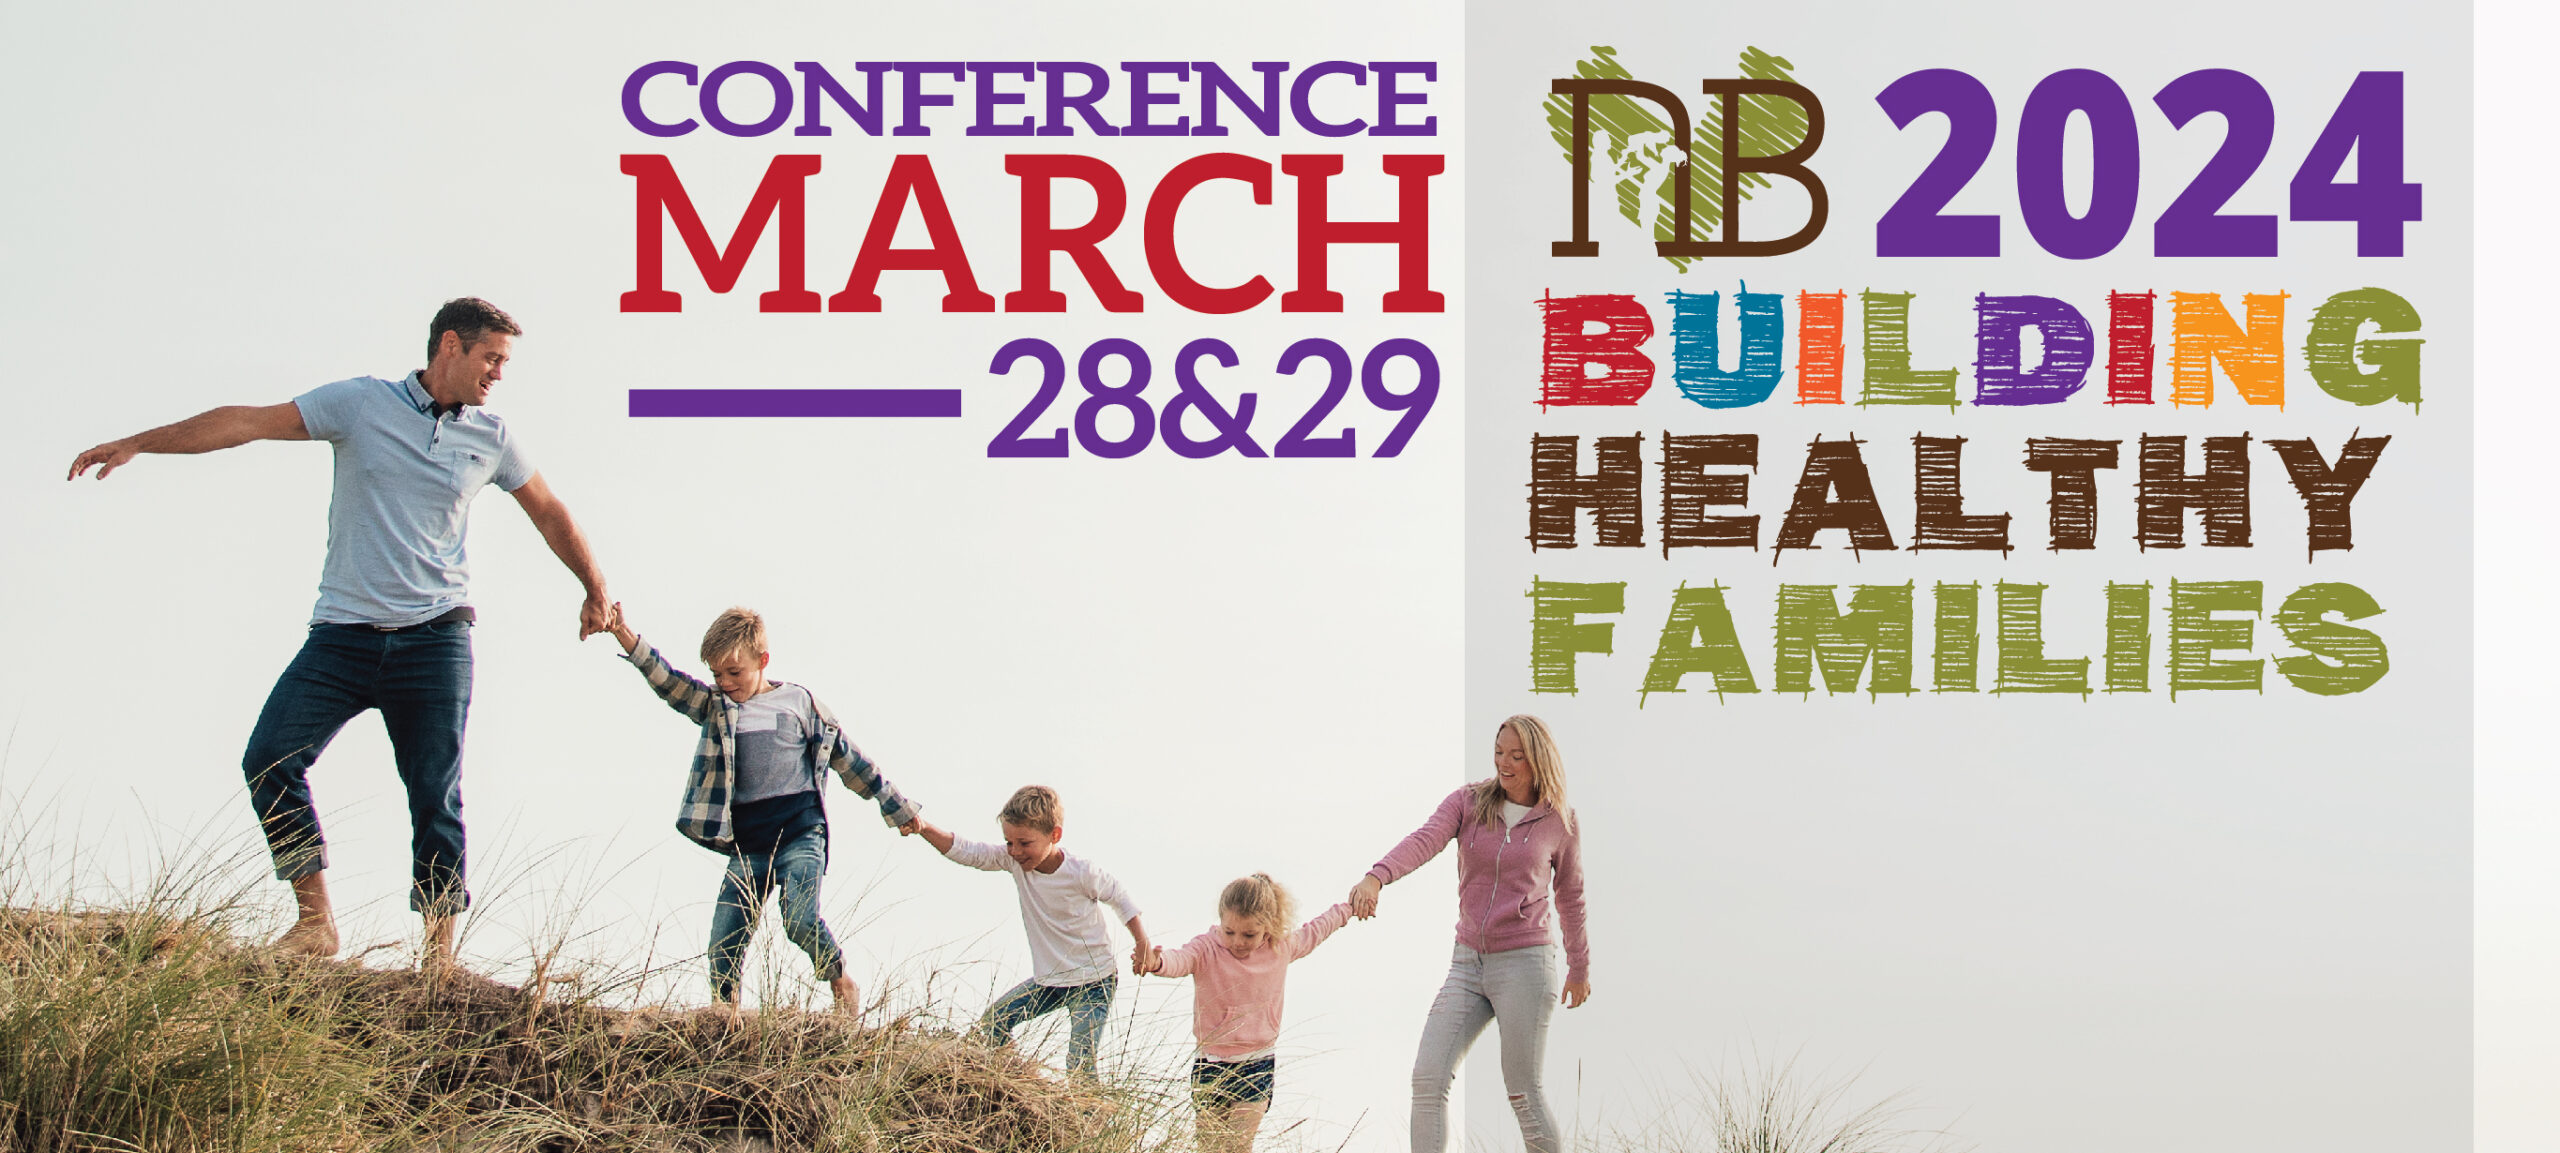 Building Healthy Families